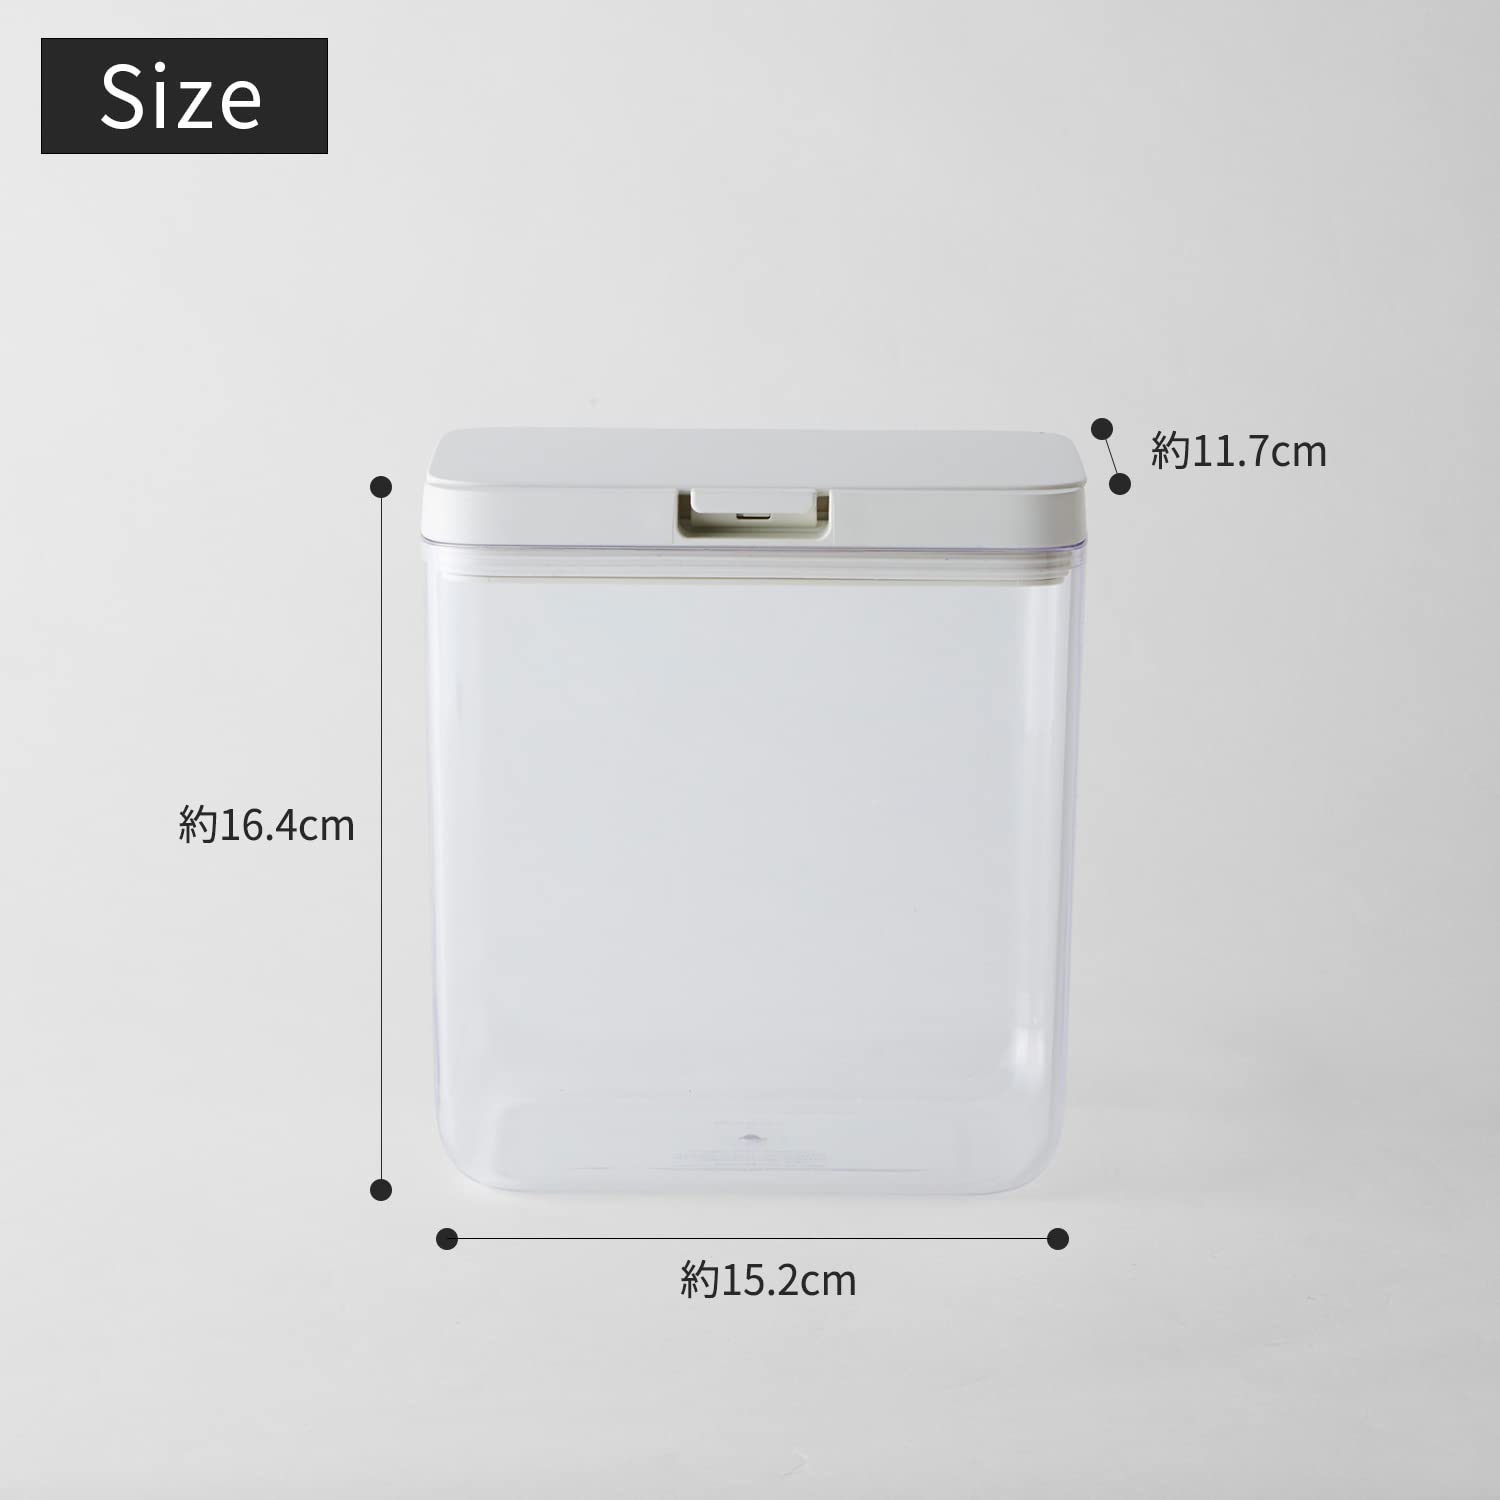 ma-na(marna) preservation container ( wide tall / white ) kitchen storage plastic ( food ingredients seasoning moisture prevention )gdo lock container K761